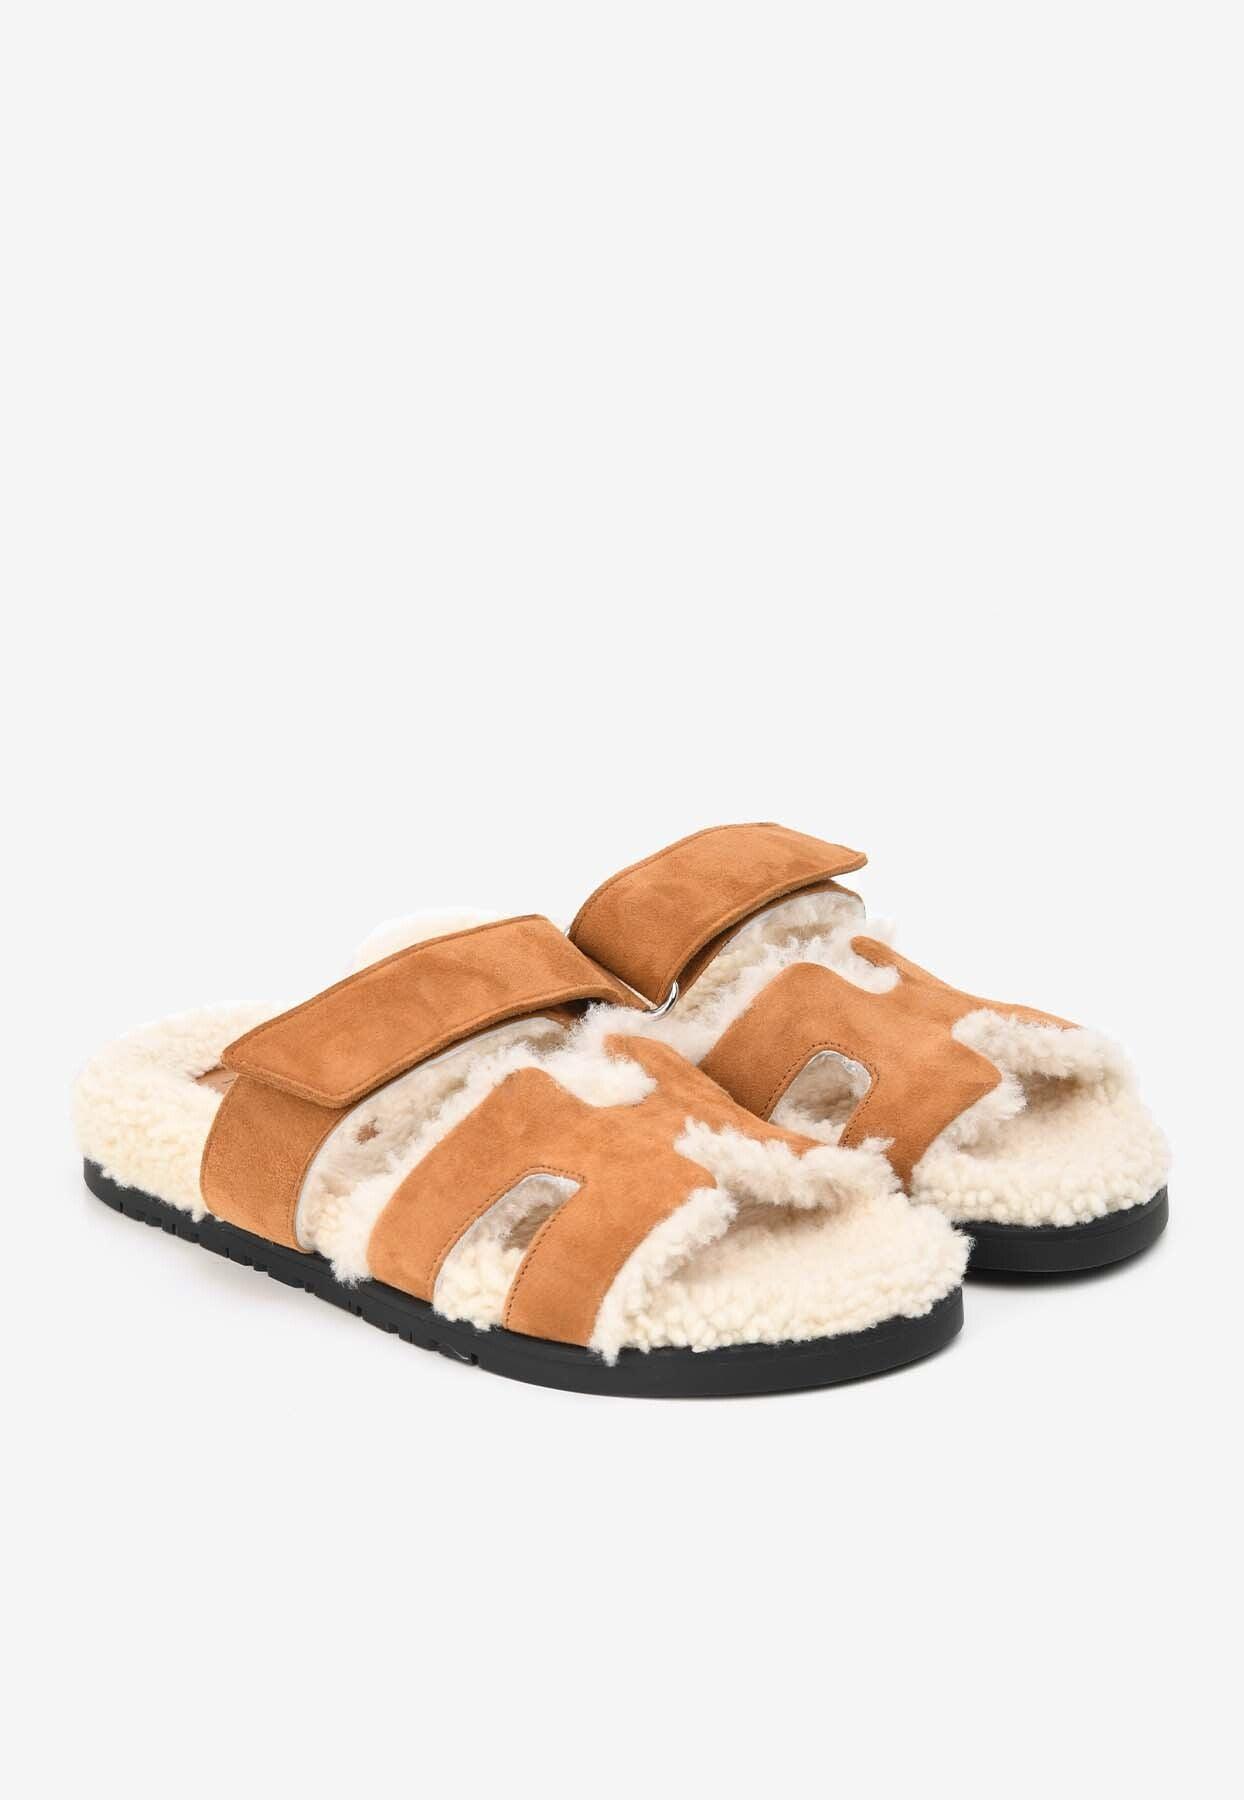 Hermès Chypre Shearling Suede Sandals in White | Lyst